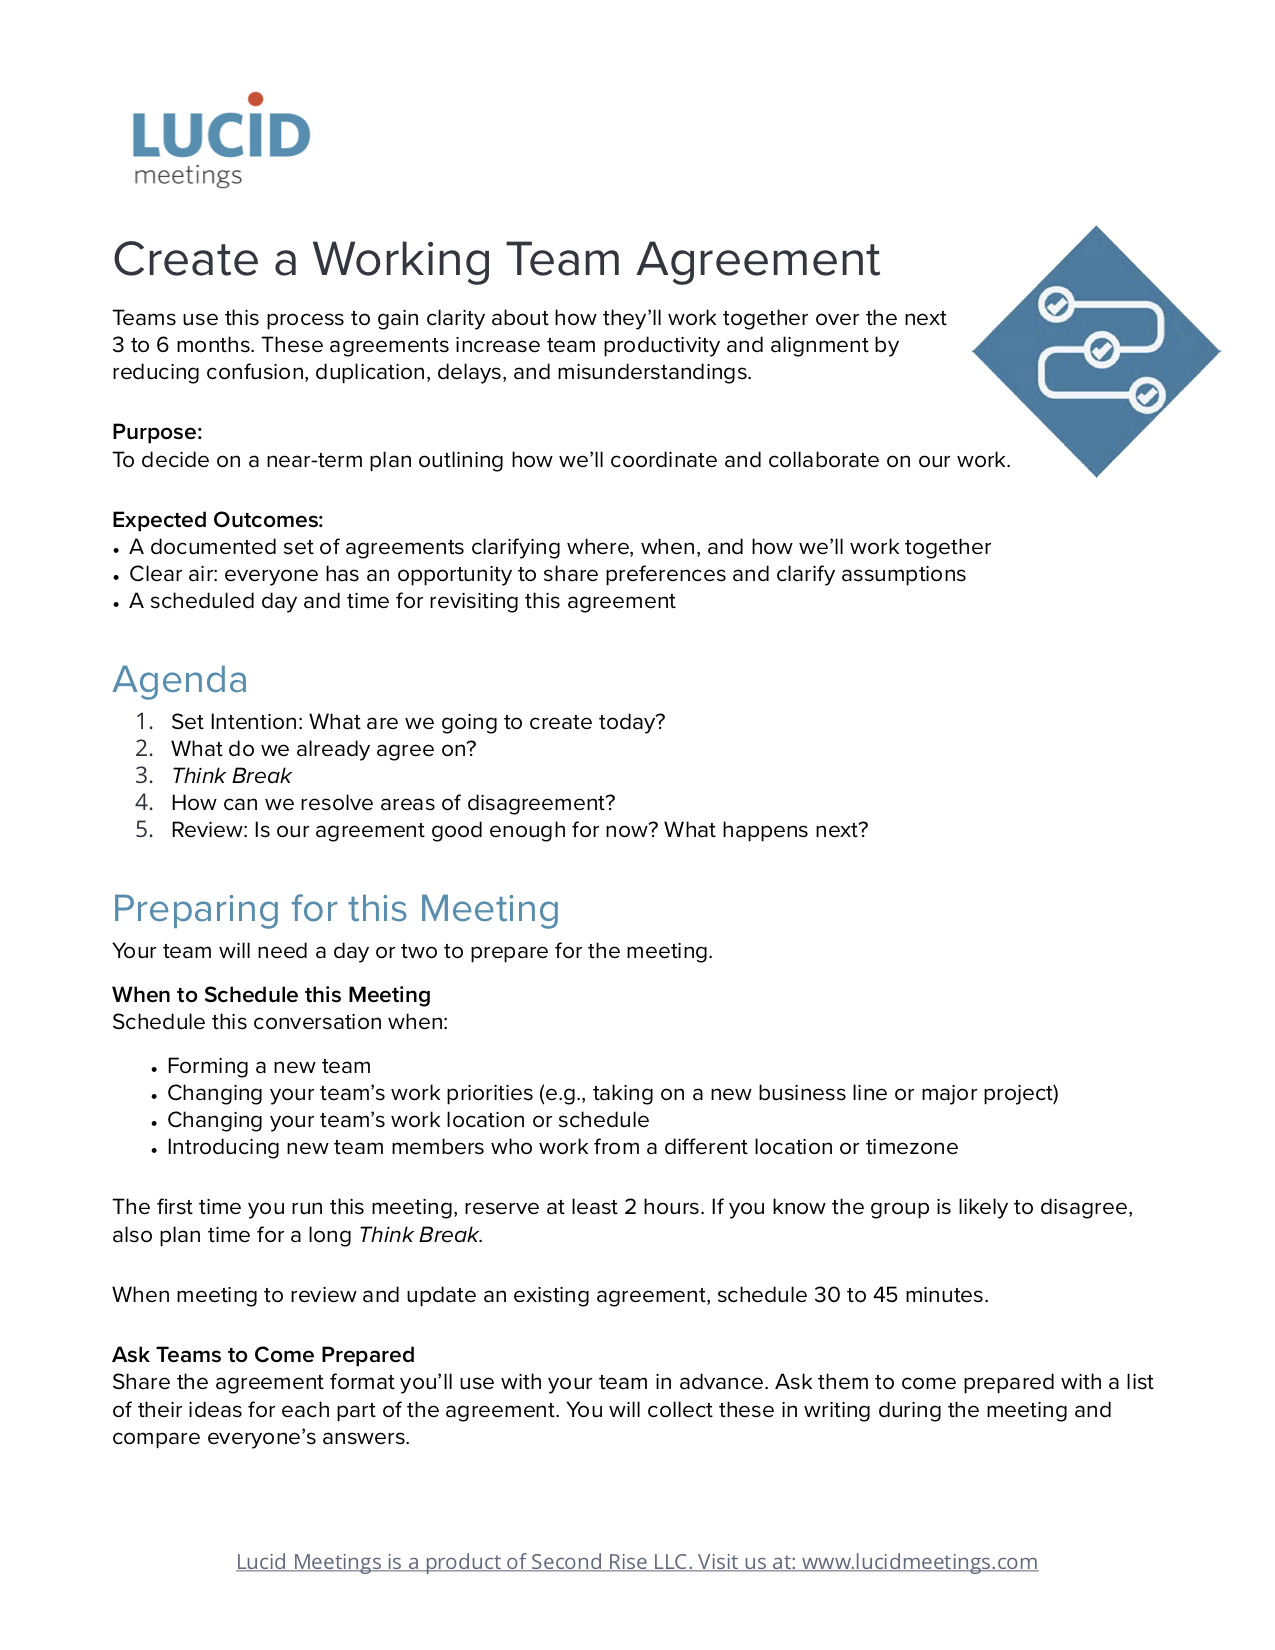 Lucid-How-to-Working-Team-Agreement